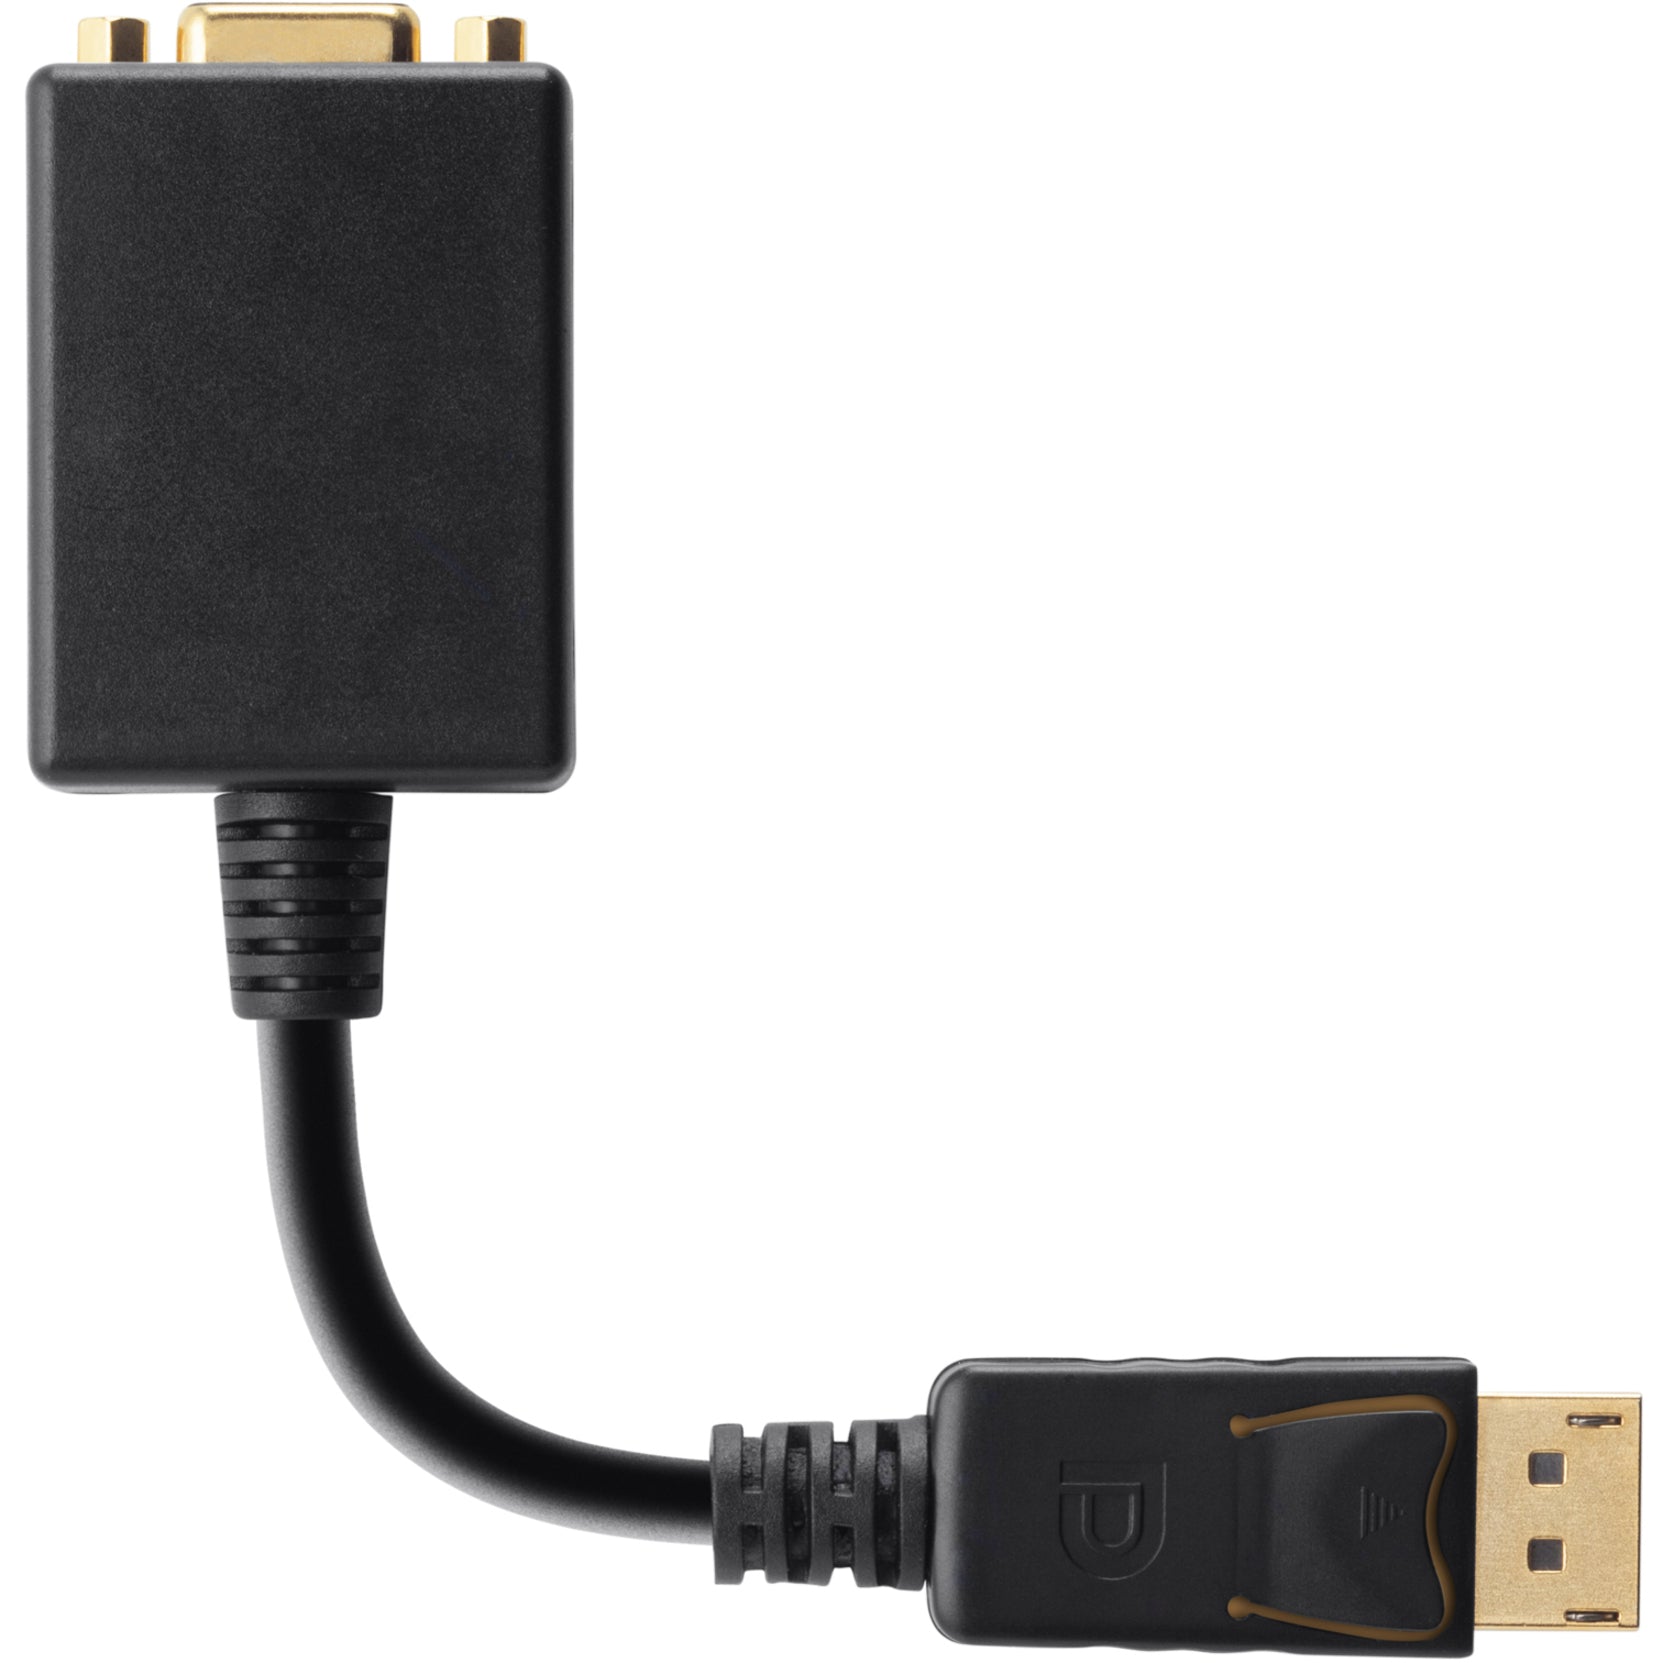 Belkin F2CD032B Displayport to VGA Adapter, Video Cable, 6", Copper Conductor, Black